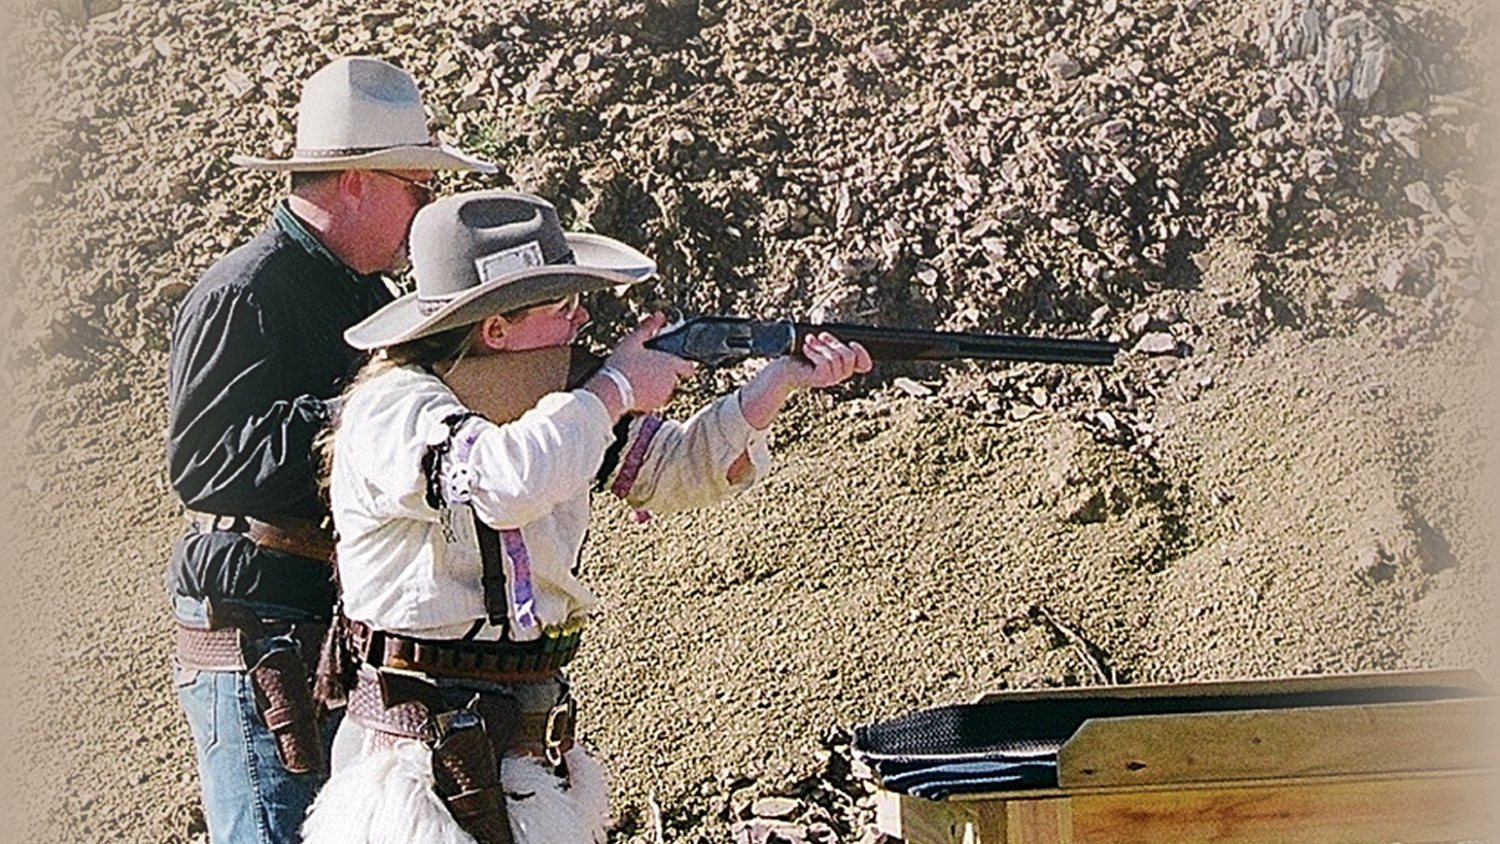 Best Cowboy Revolvers for Competition & Plinking [2023]